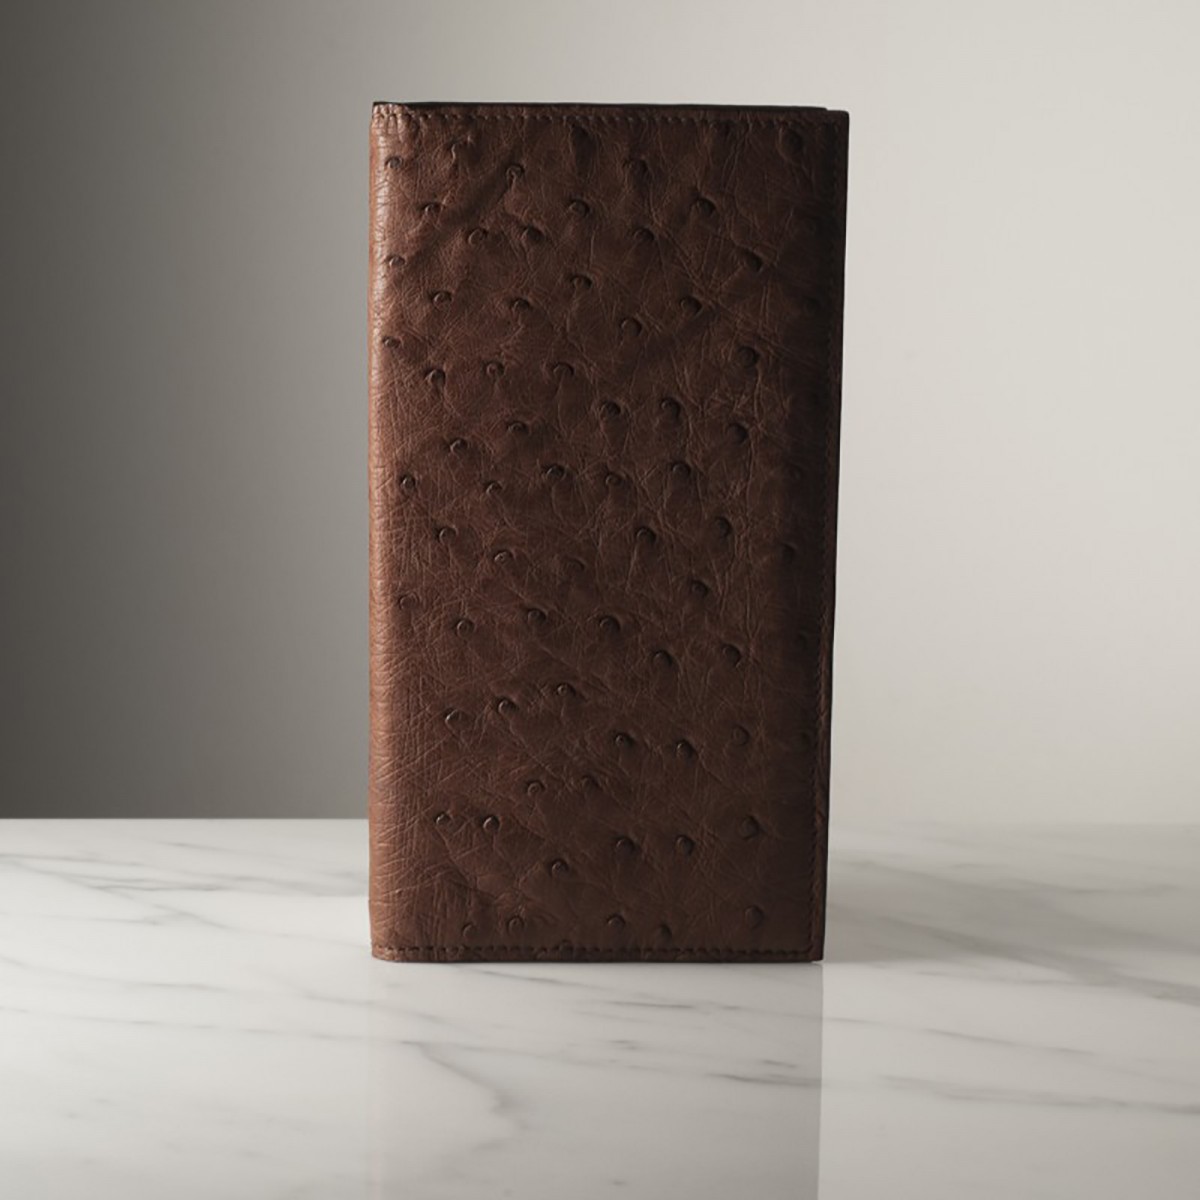 ROGER OSTRICH - Ostrich leather wallet, handmade in Italy